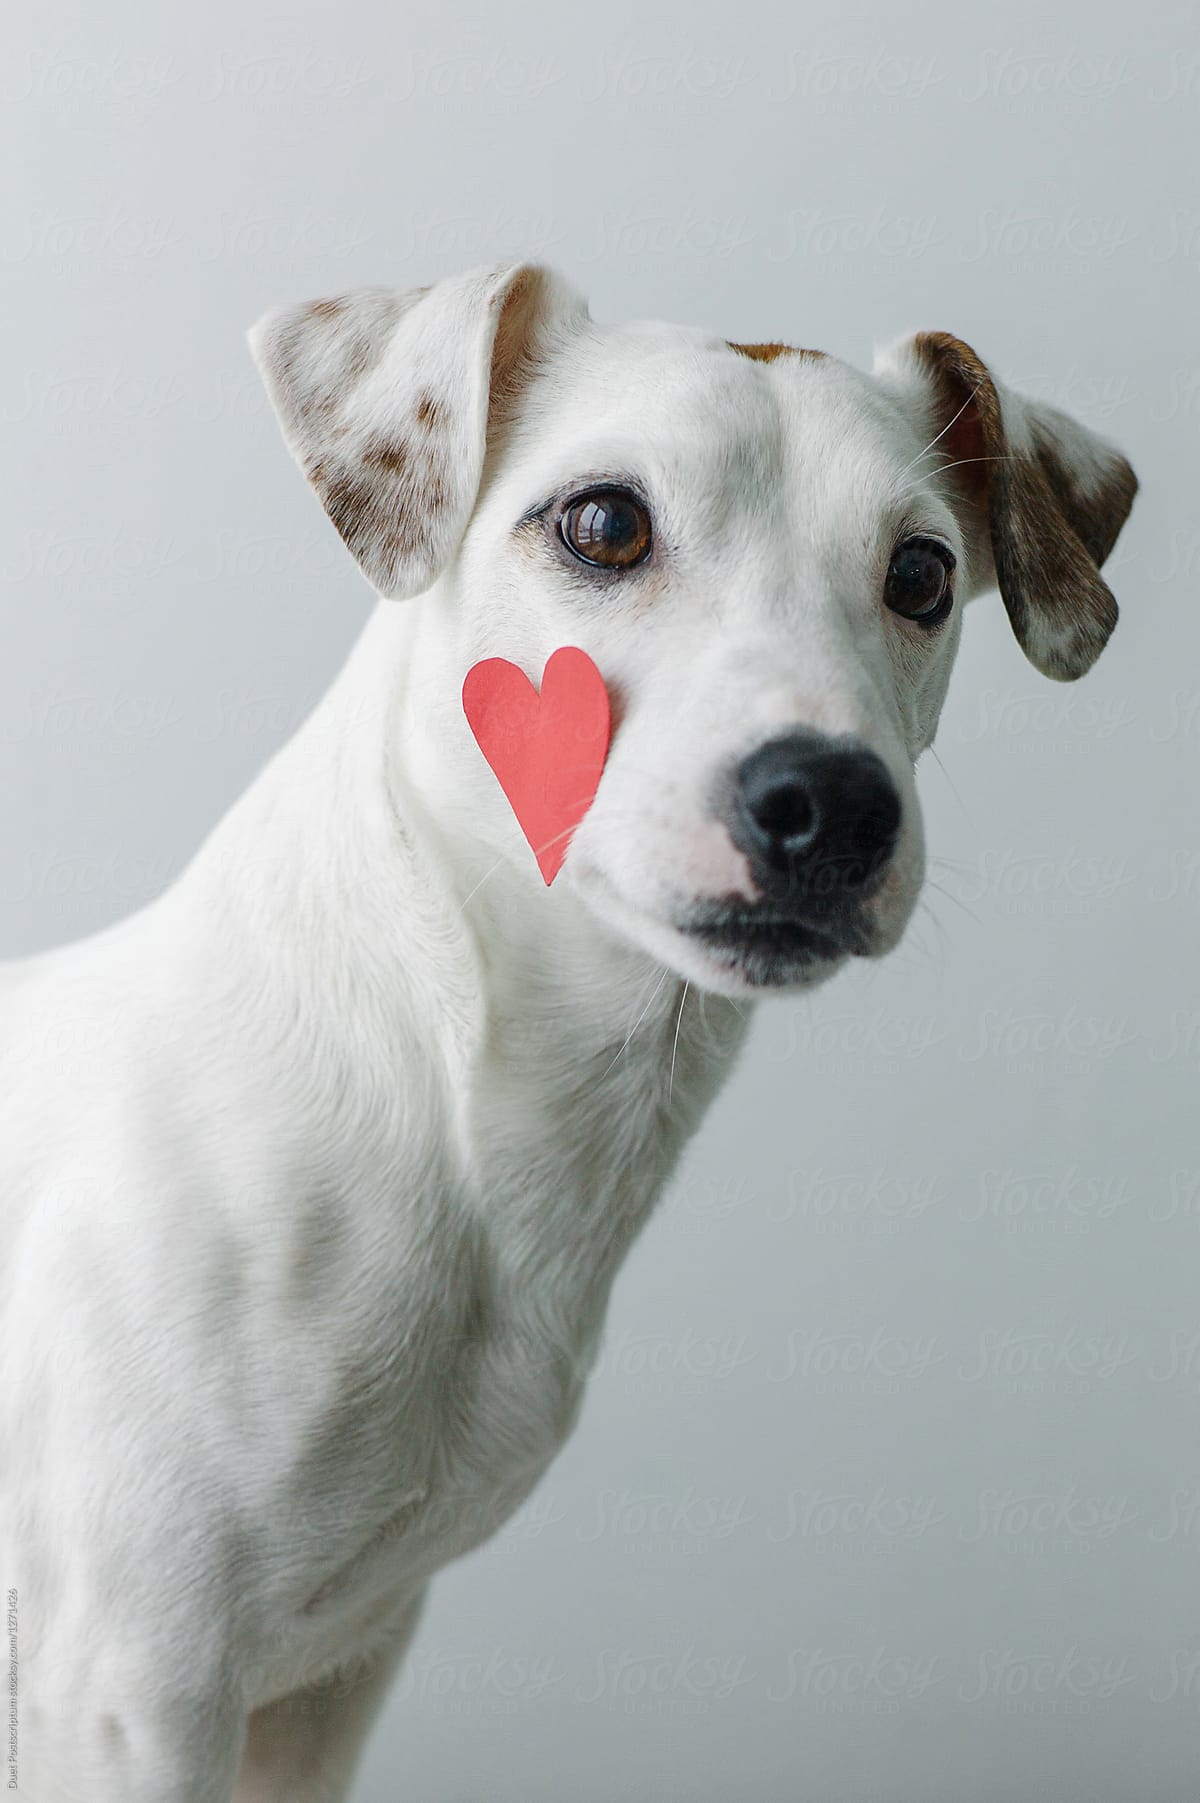 A dog with heart on cheek